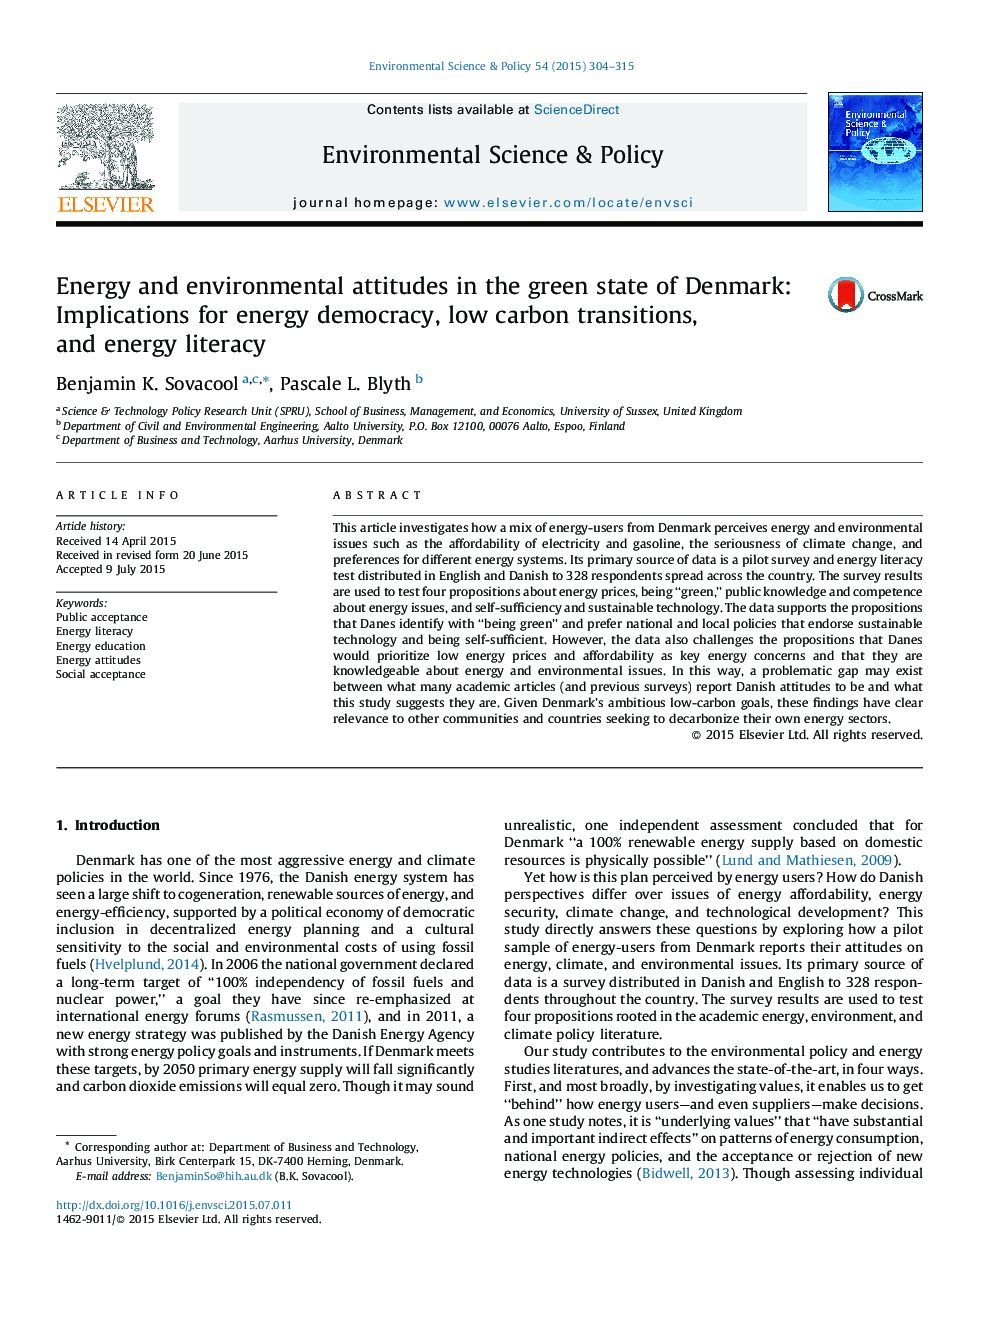 Energy and environmental attitudes in the green state of Denmark: Implications for energy democracy, low carbon transitions, and energy literacy